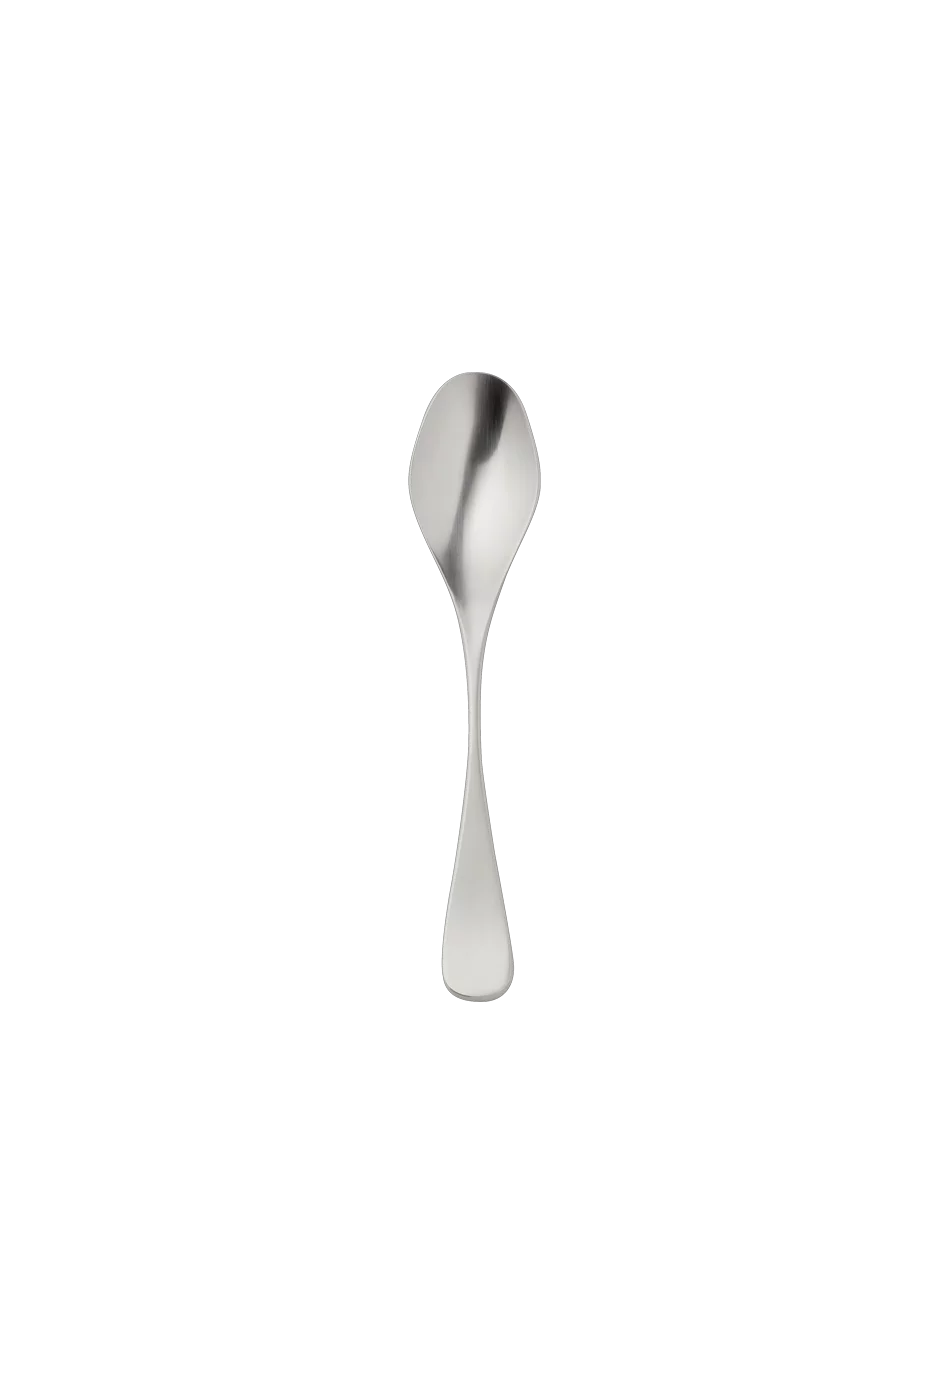 Scandia Coffee Spoon 13,0 Cm (18/8 stainless steel)